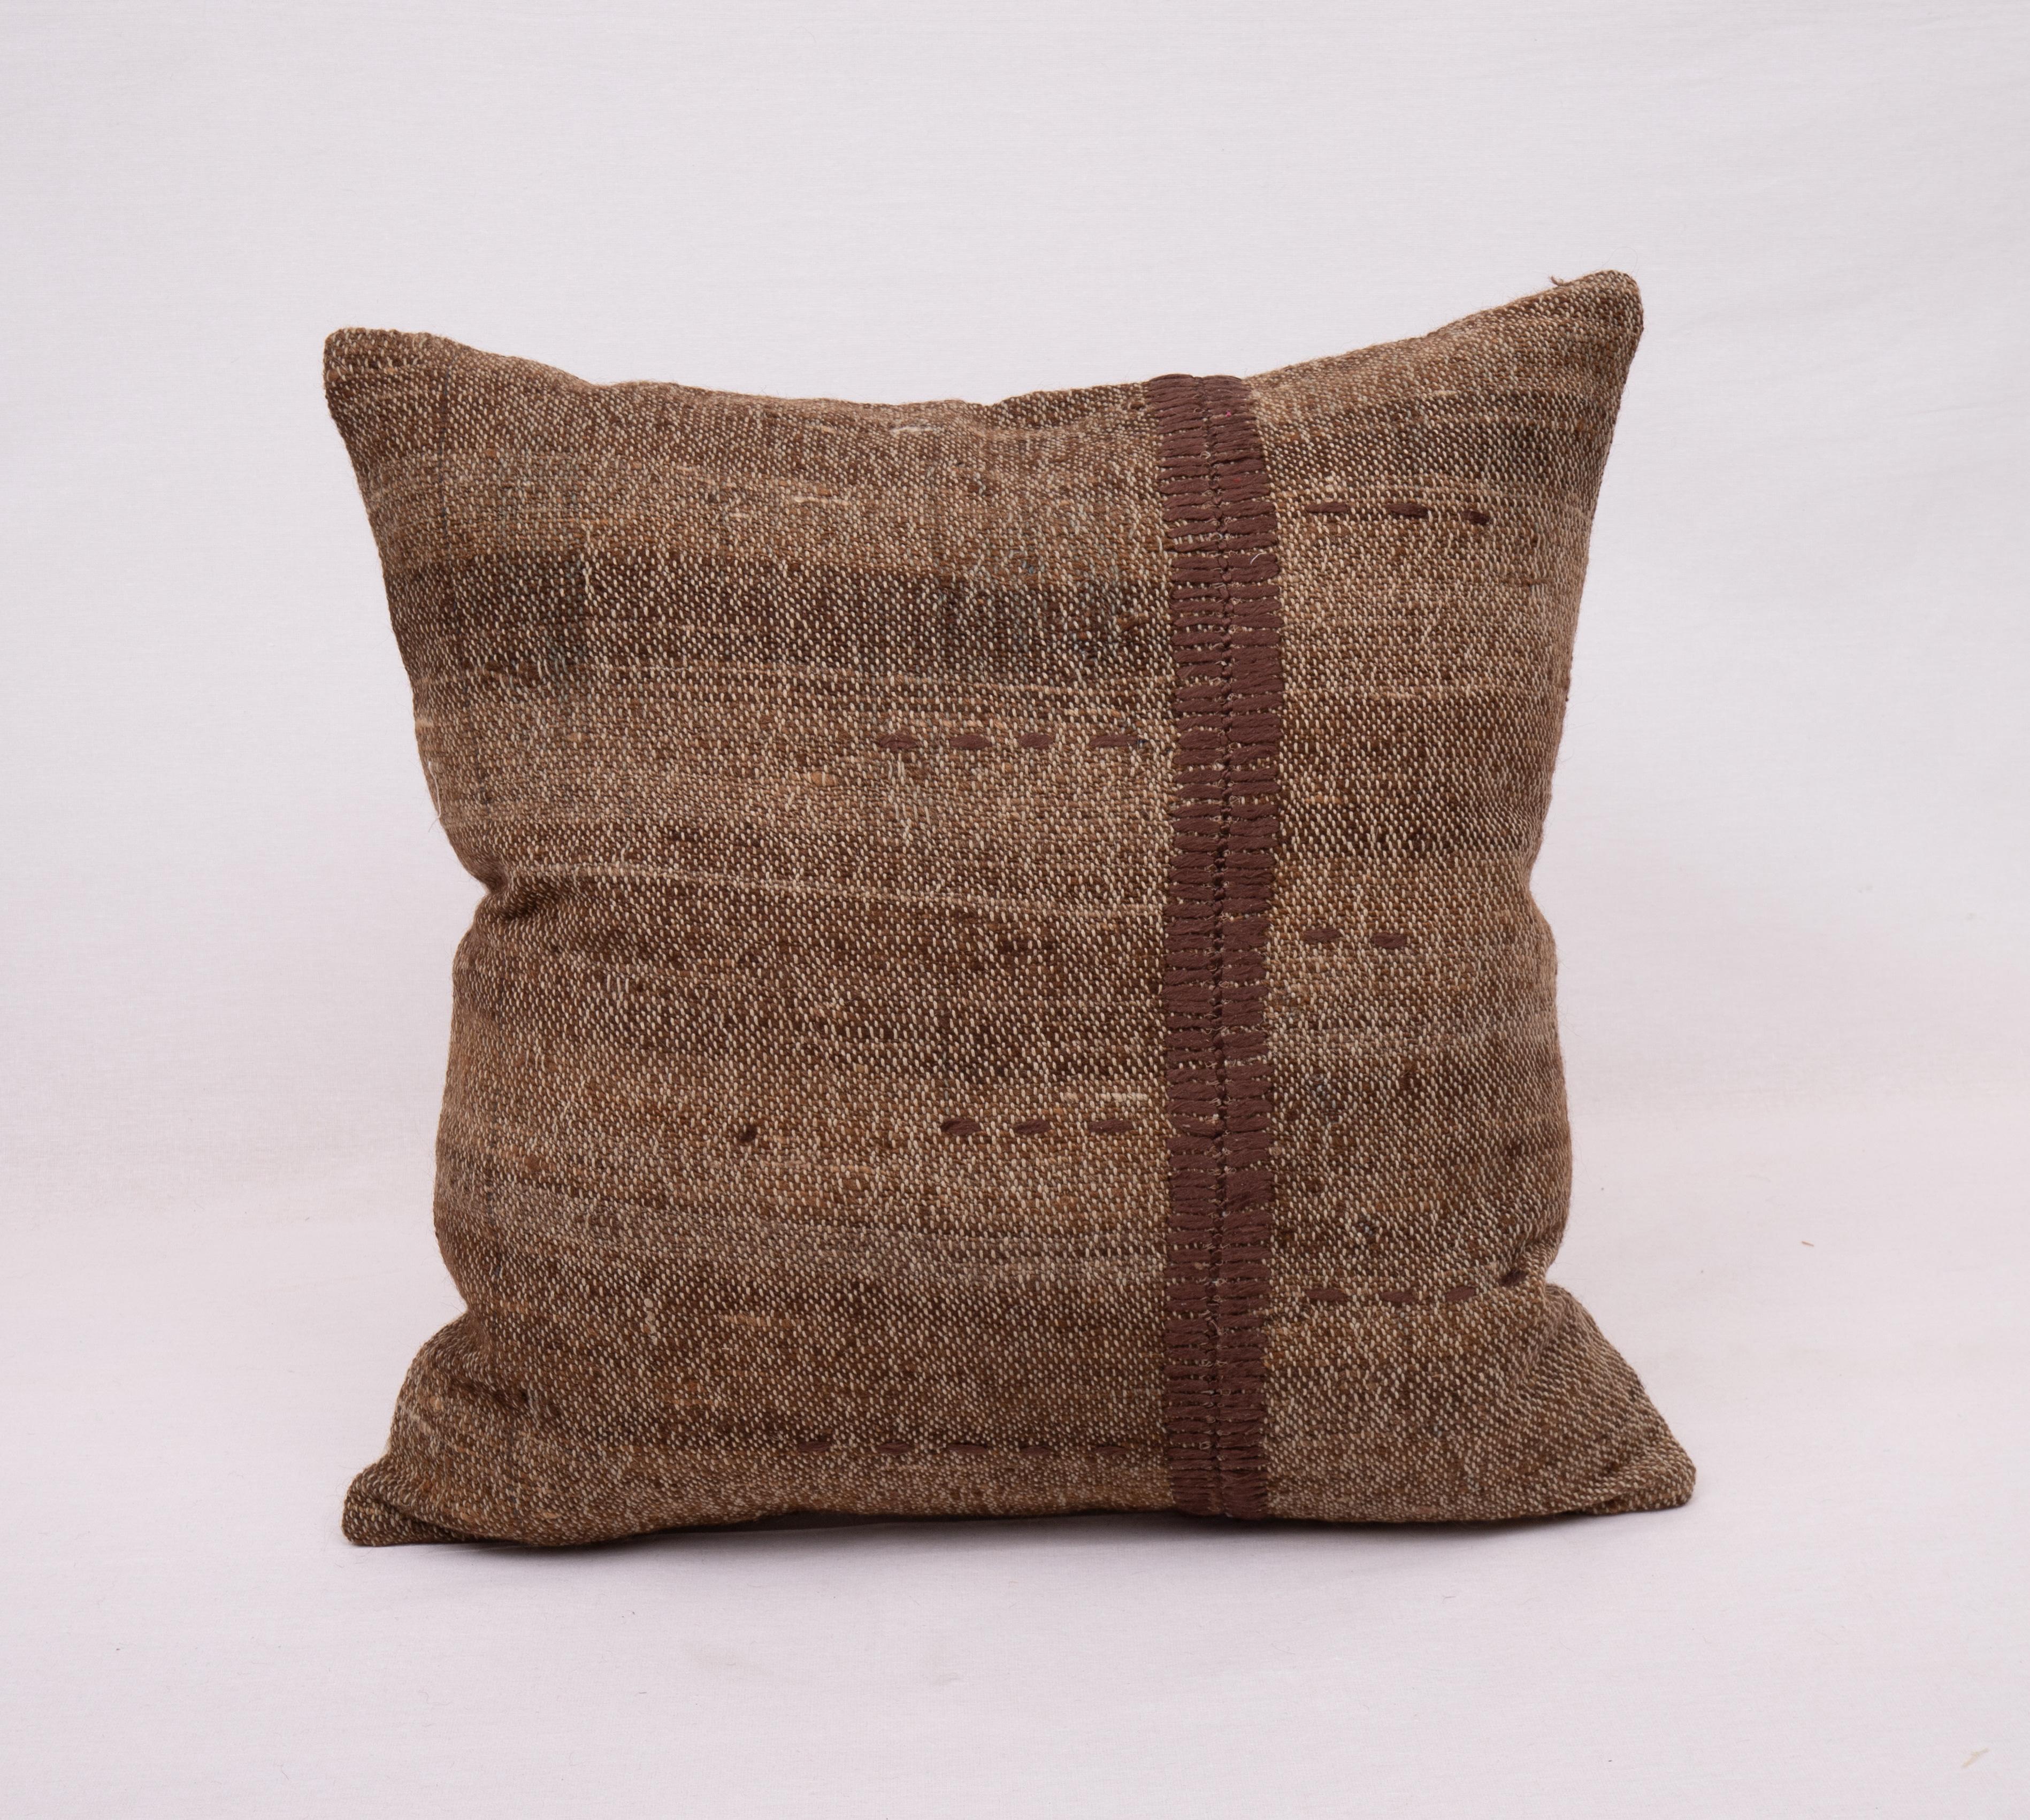 Rustic pillow case Made from a Vintage Un-Dyed Wool Coverlet, Mid 20th C


This pillow is made from a vintage coverlet that is hand woven using un-dyed wool. Our addition to the piece is silk hand stitching. It does not come with an insert. Linen